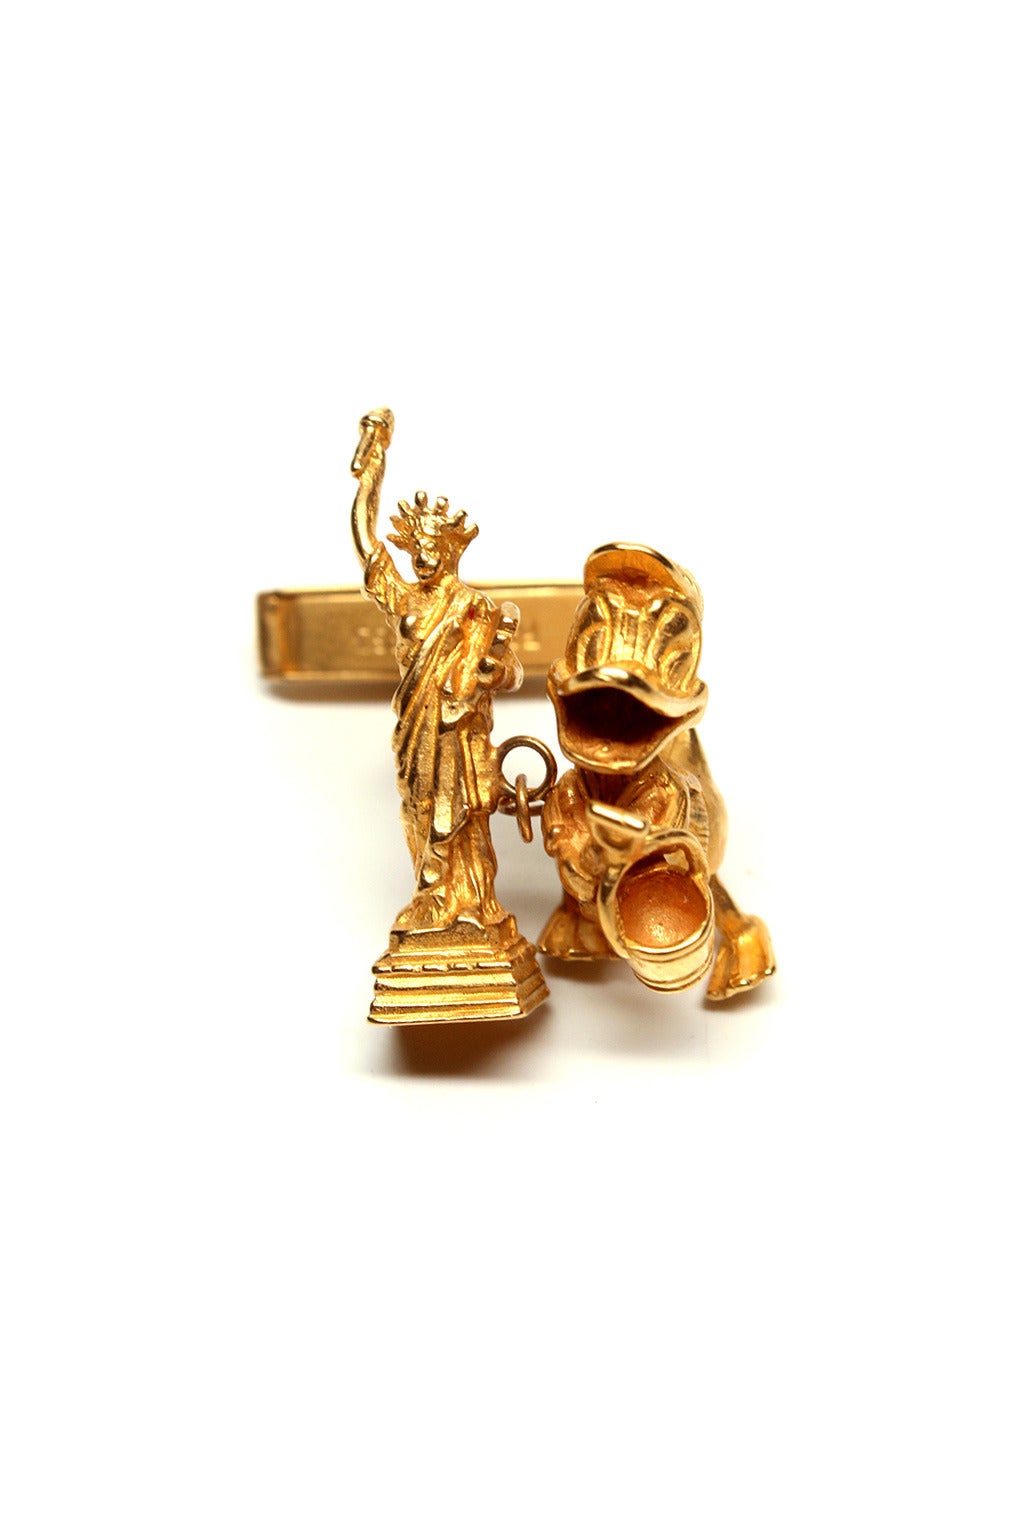 In the early 80's, Tom Binns designed a collection using vintage Chim charms arranged in amusing and eccentric pairings. These unusual and original cuff links make a perfect holiday gift.